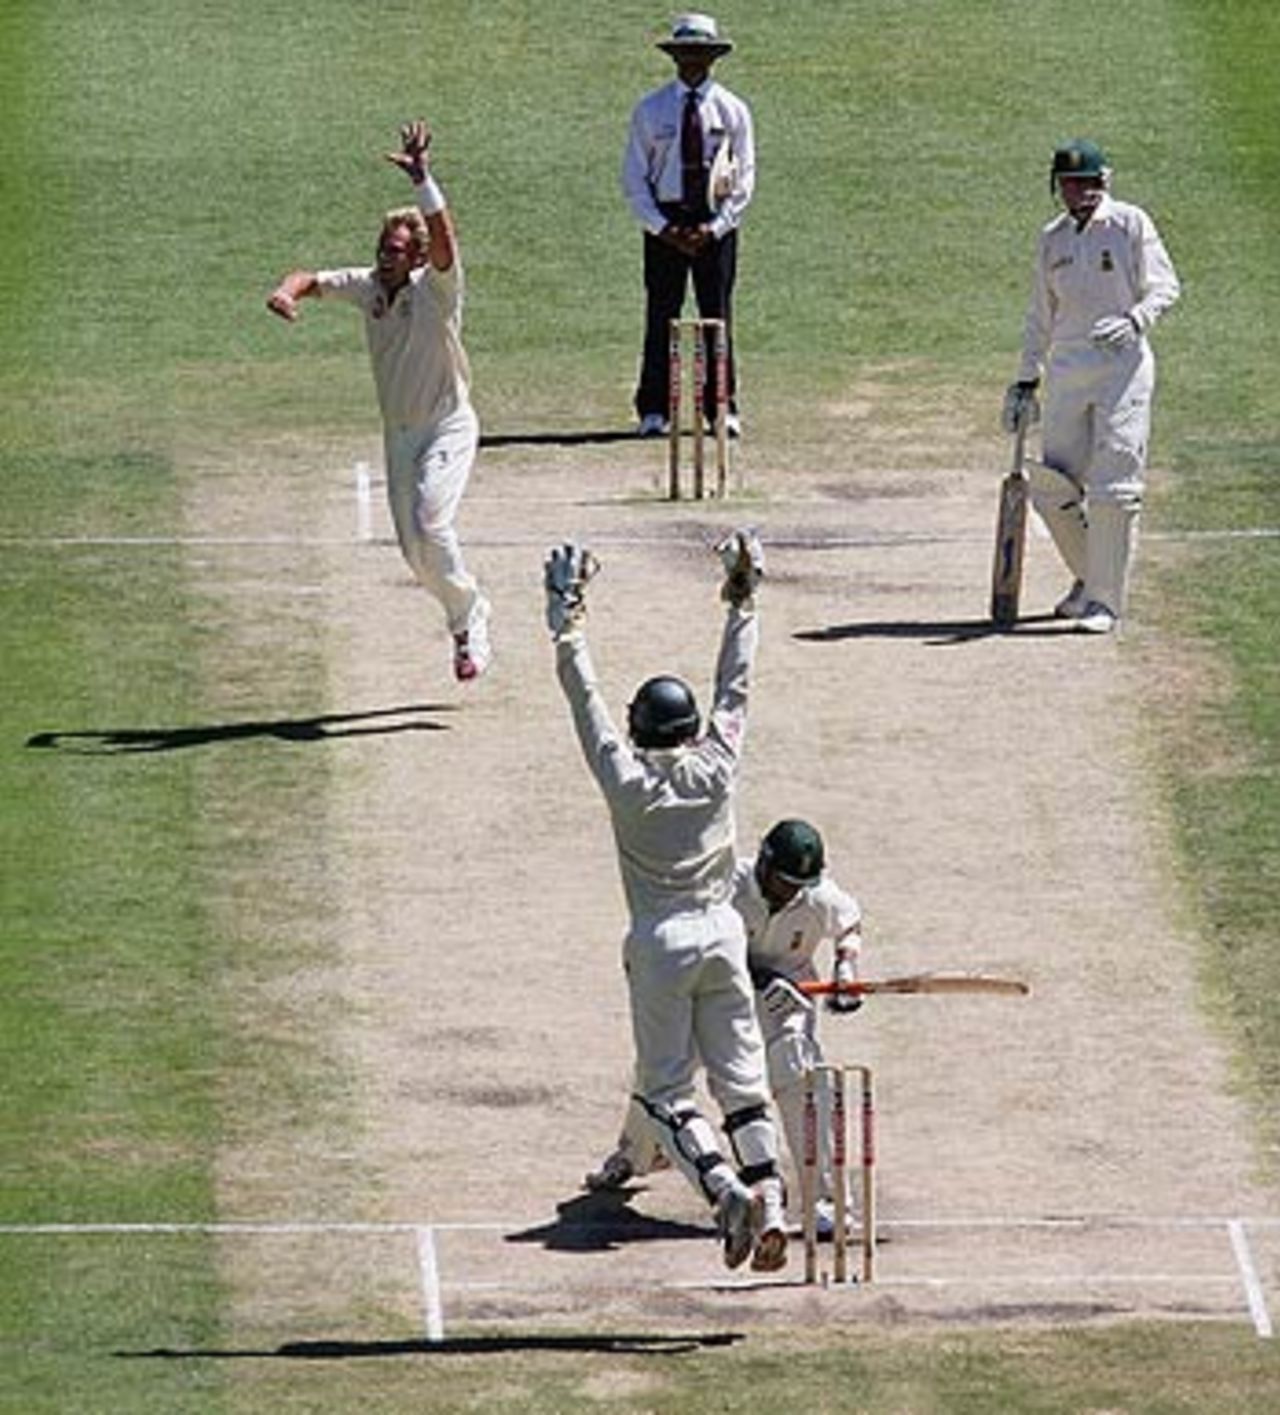 Shane Warne dismissed Ashwell Prince for the fourth time in four innings, Australia v South Africa, 2nd Test, Melbourne, 4th day, December 30, 2005